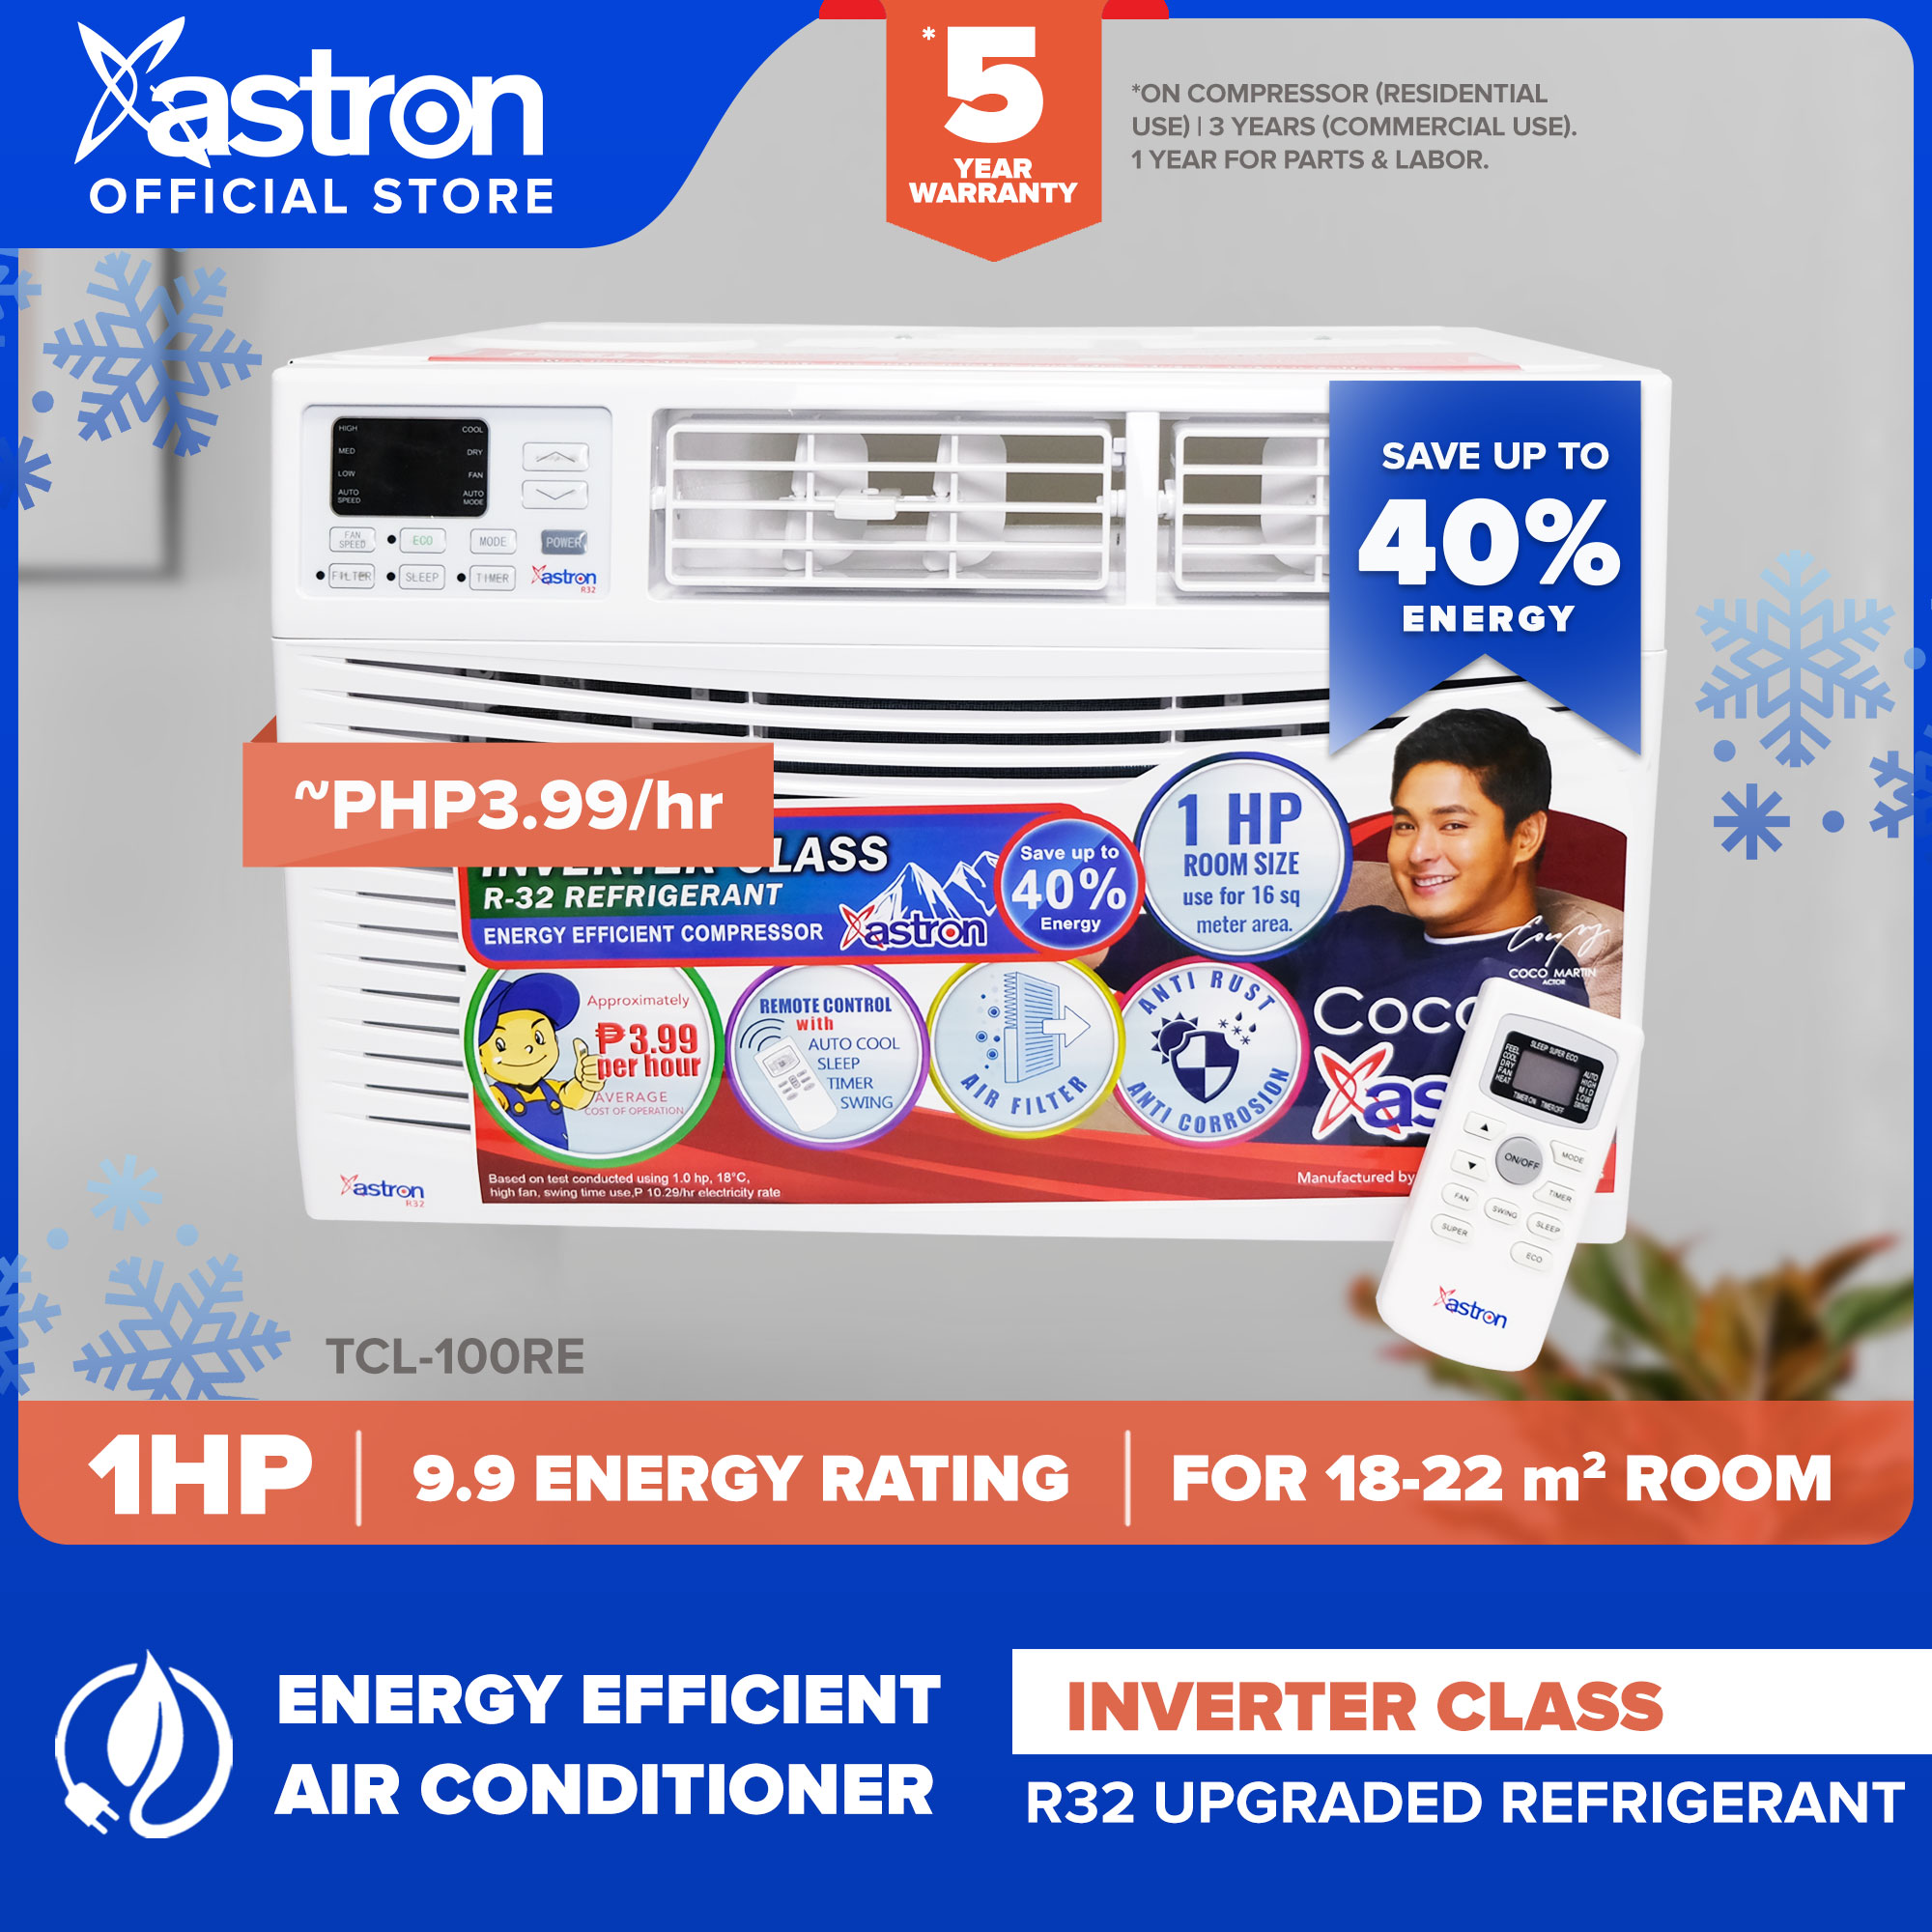 astron-inverter-class-1-hp-aircon-with-remote-window-type-air